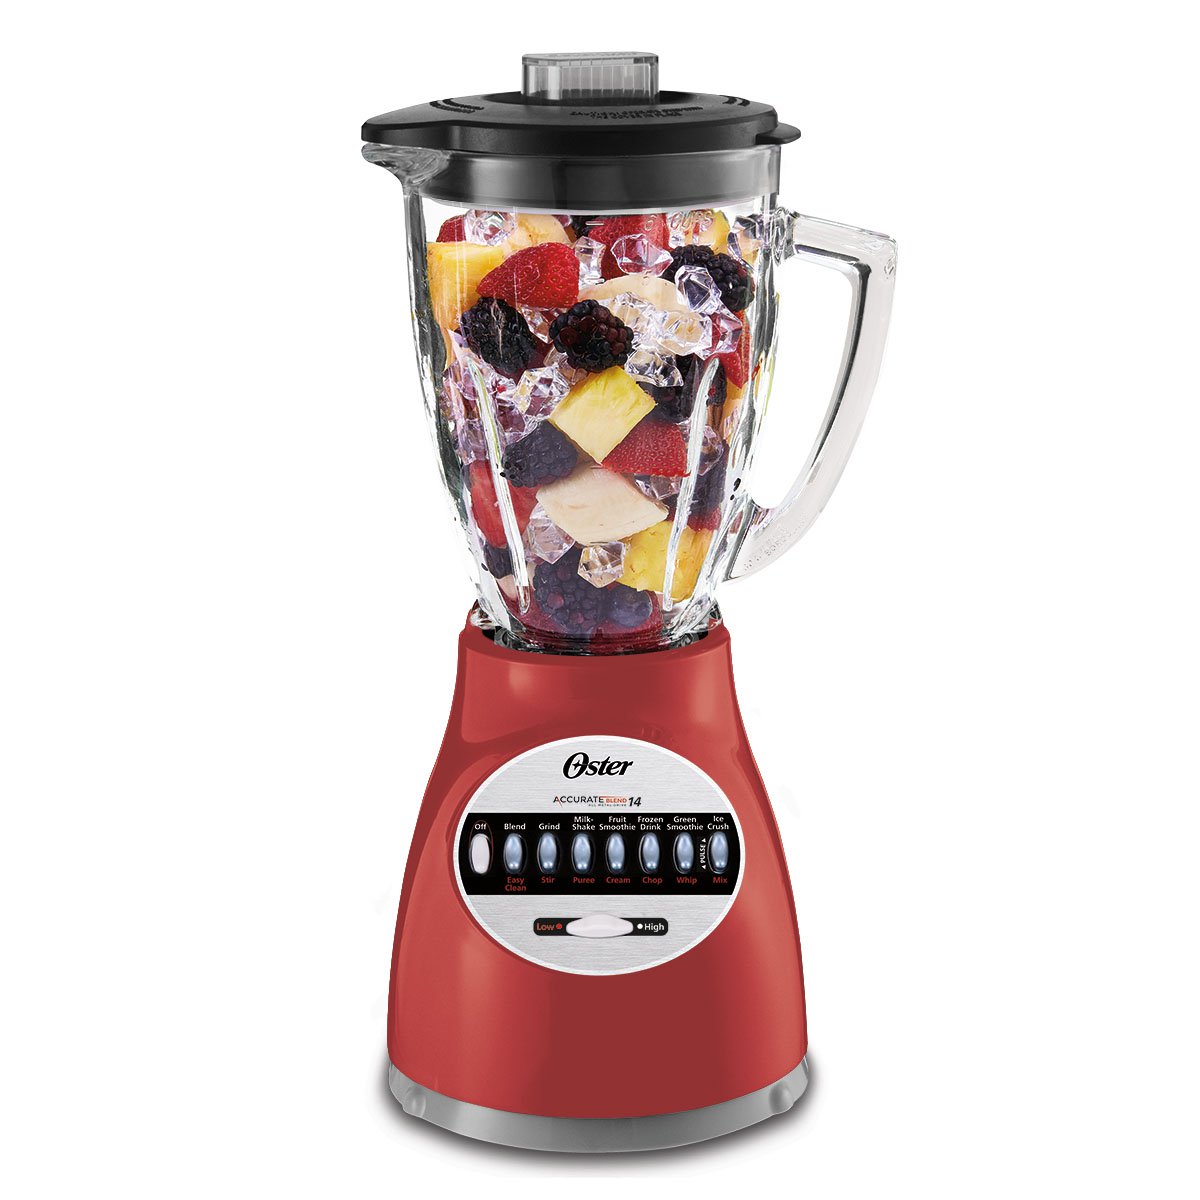 14-speed Accurate Countertop Blender, Red, 450 Watts – KindleCache